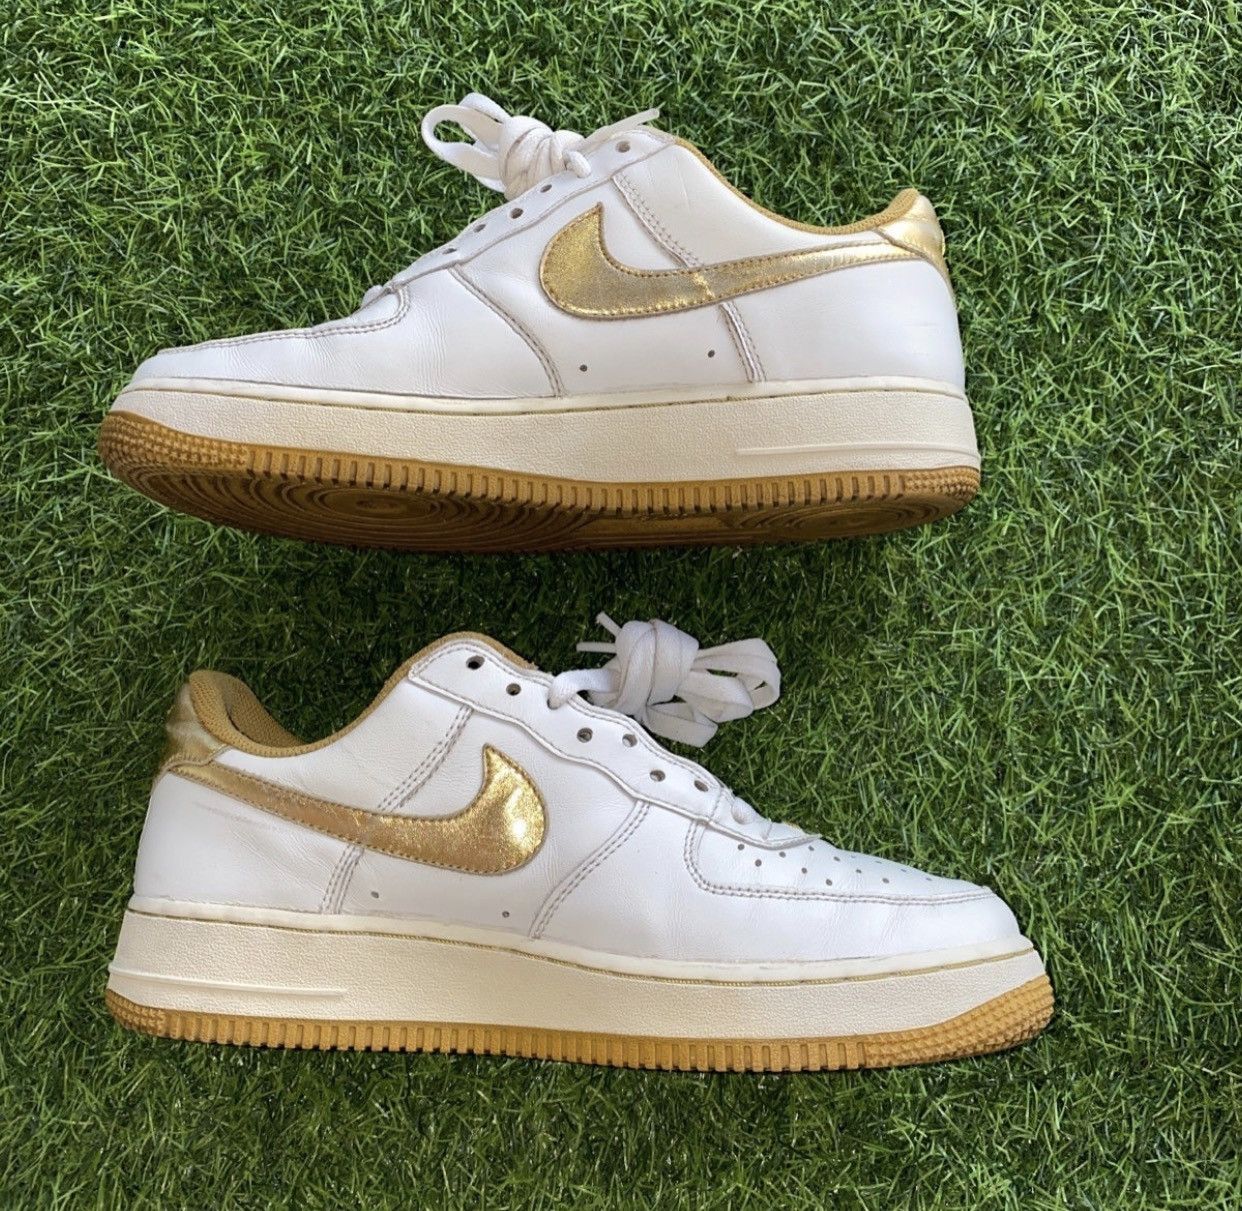 Nike Nike Airforces 1 Wmns 2010 released shoes No Box no insole Size US 11 / IT 41 - 4 Thumbnail